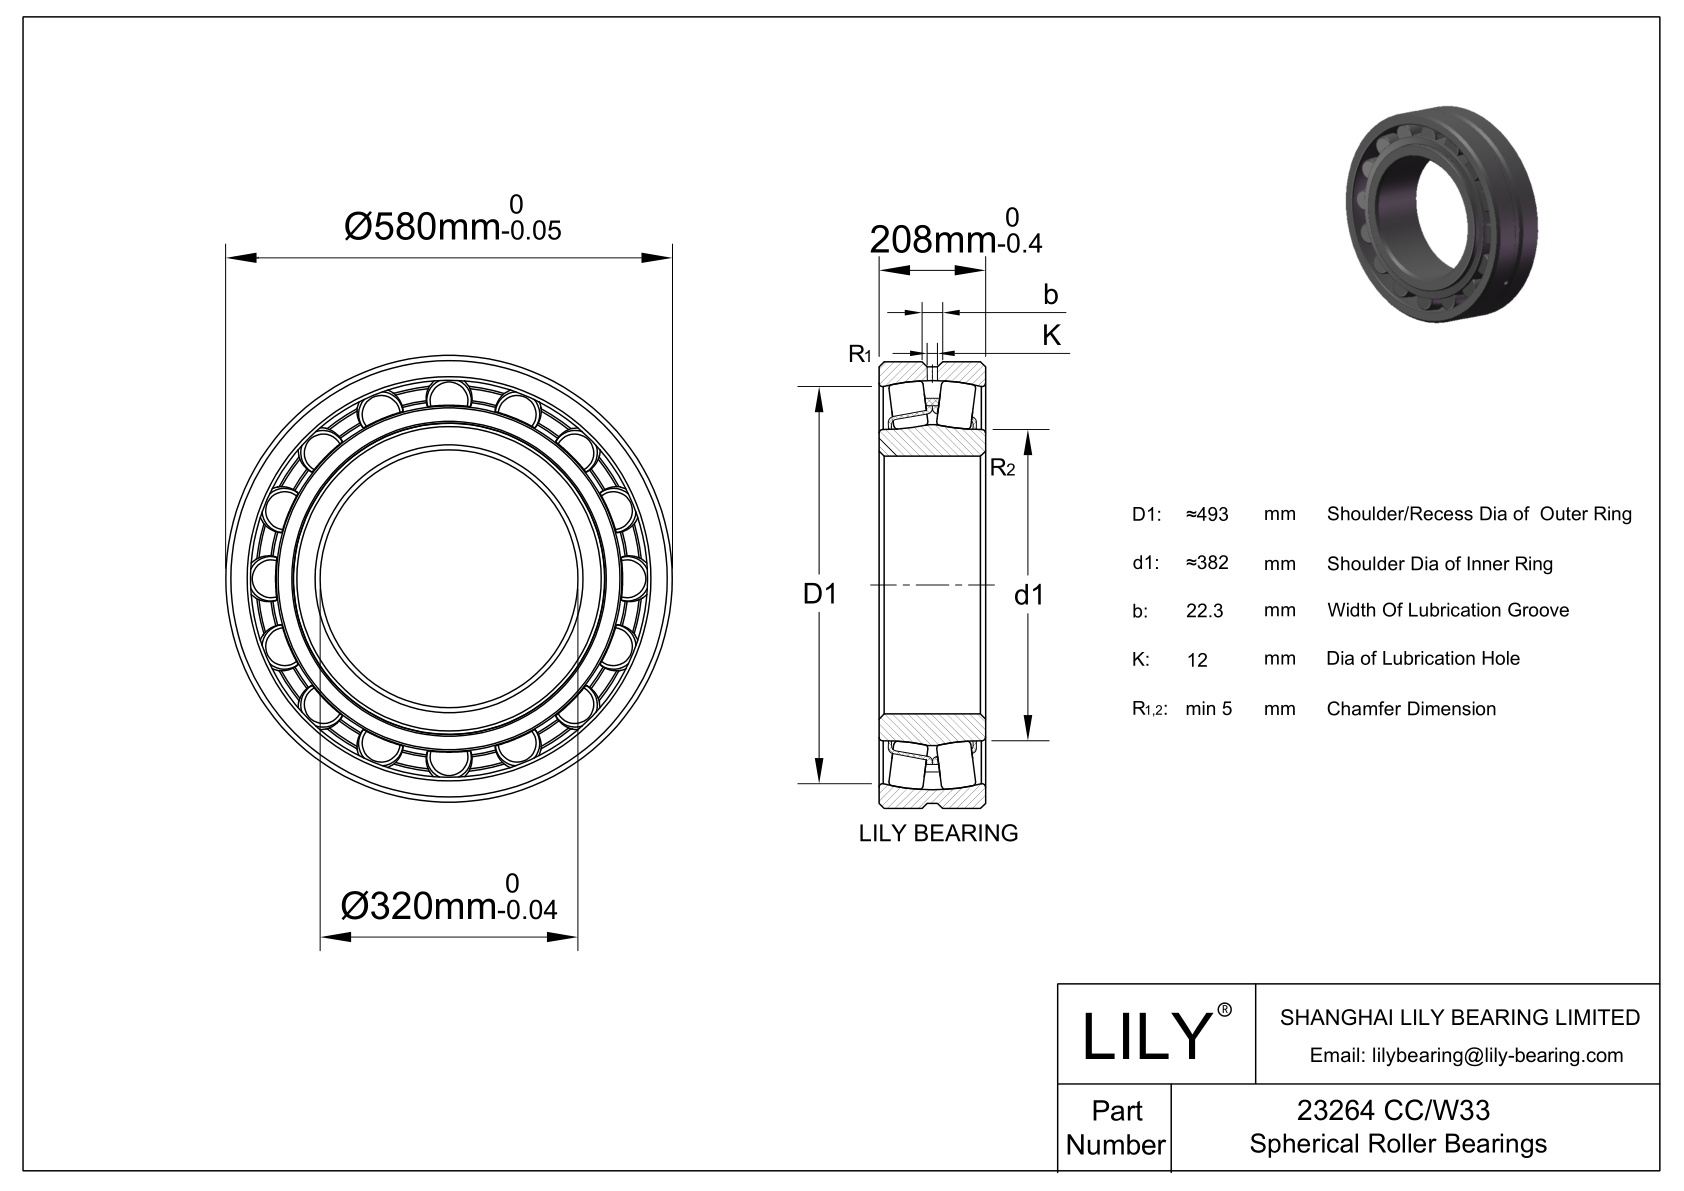 23264 CC/W33 Double Row Spherical Roller Bearing cad drawing